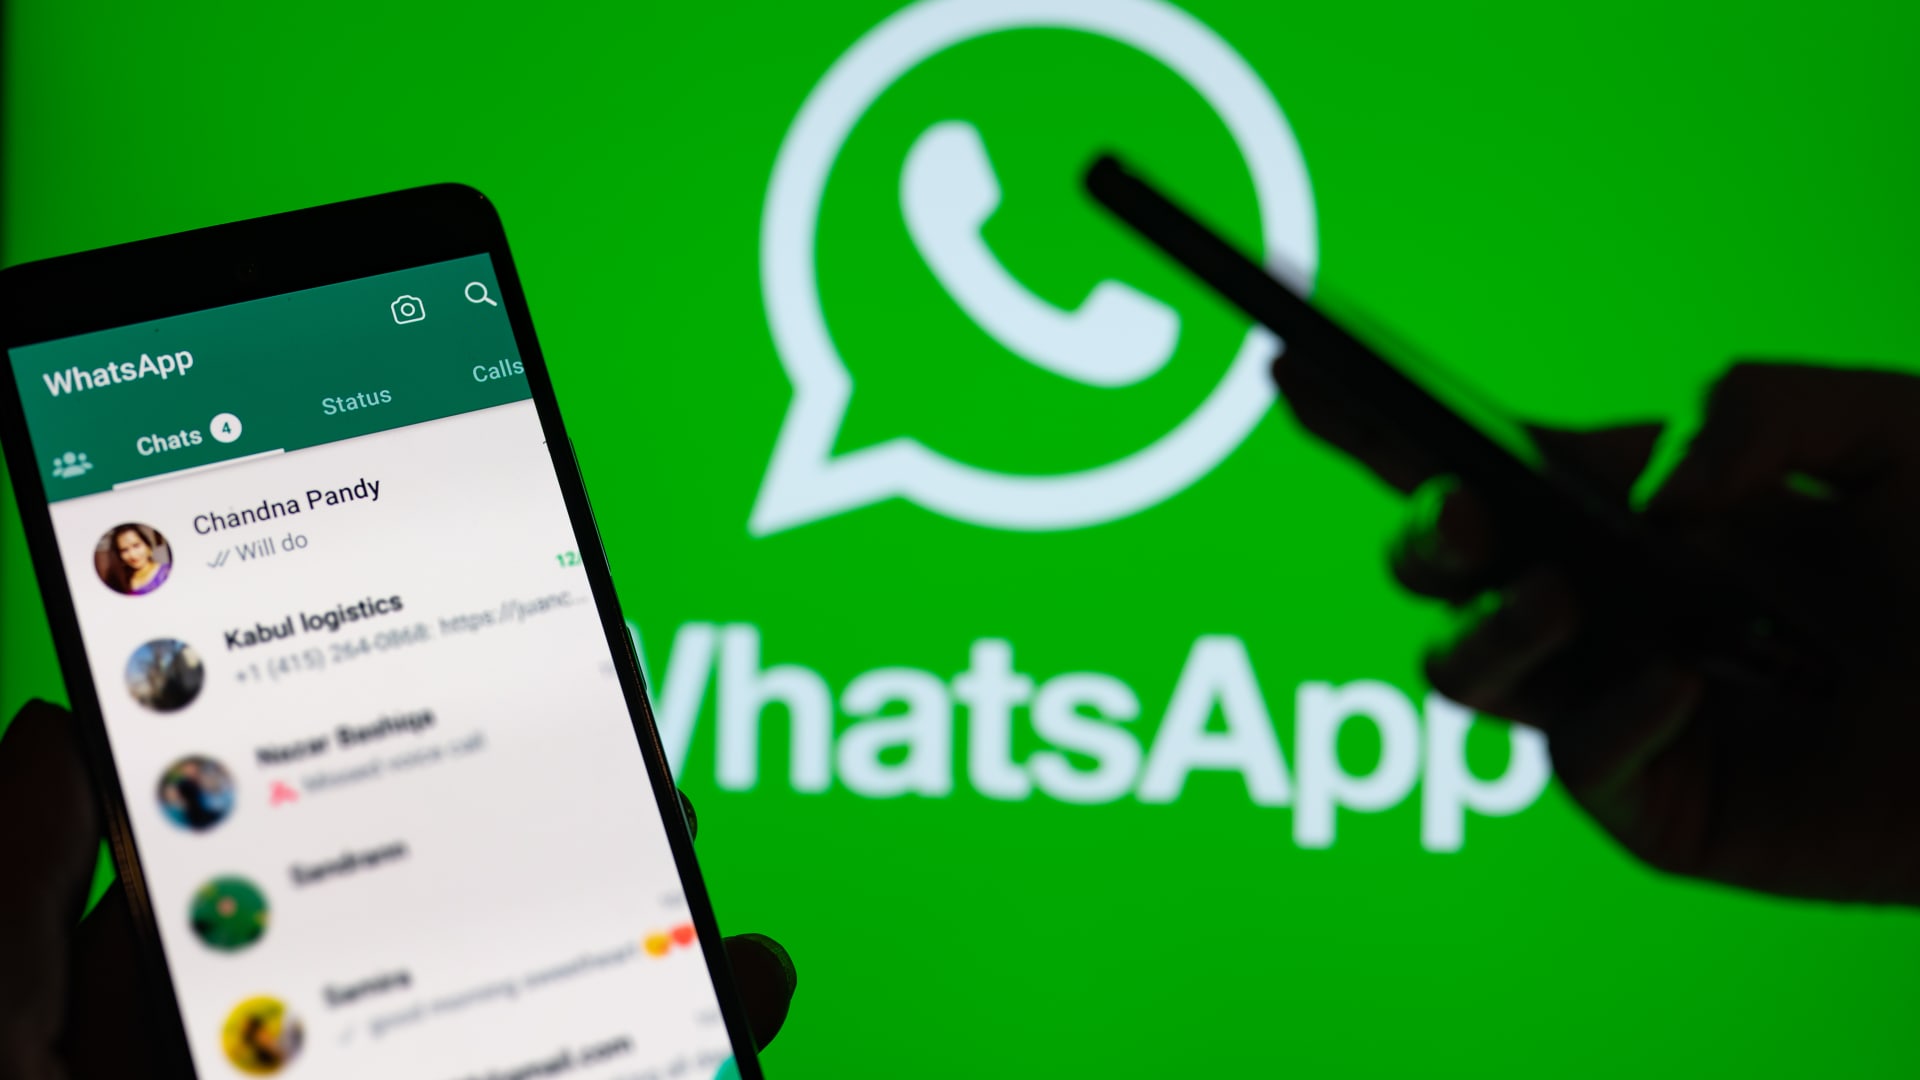 Meta’s WhatsApp is chasing big businesses to capitalize on popularity